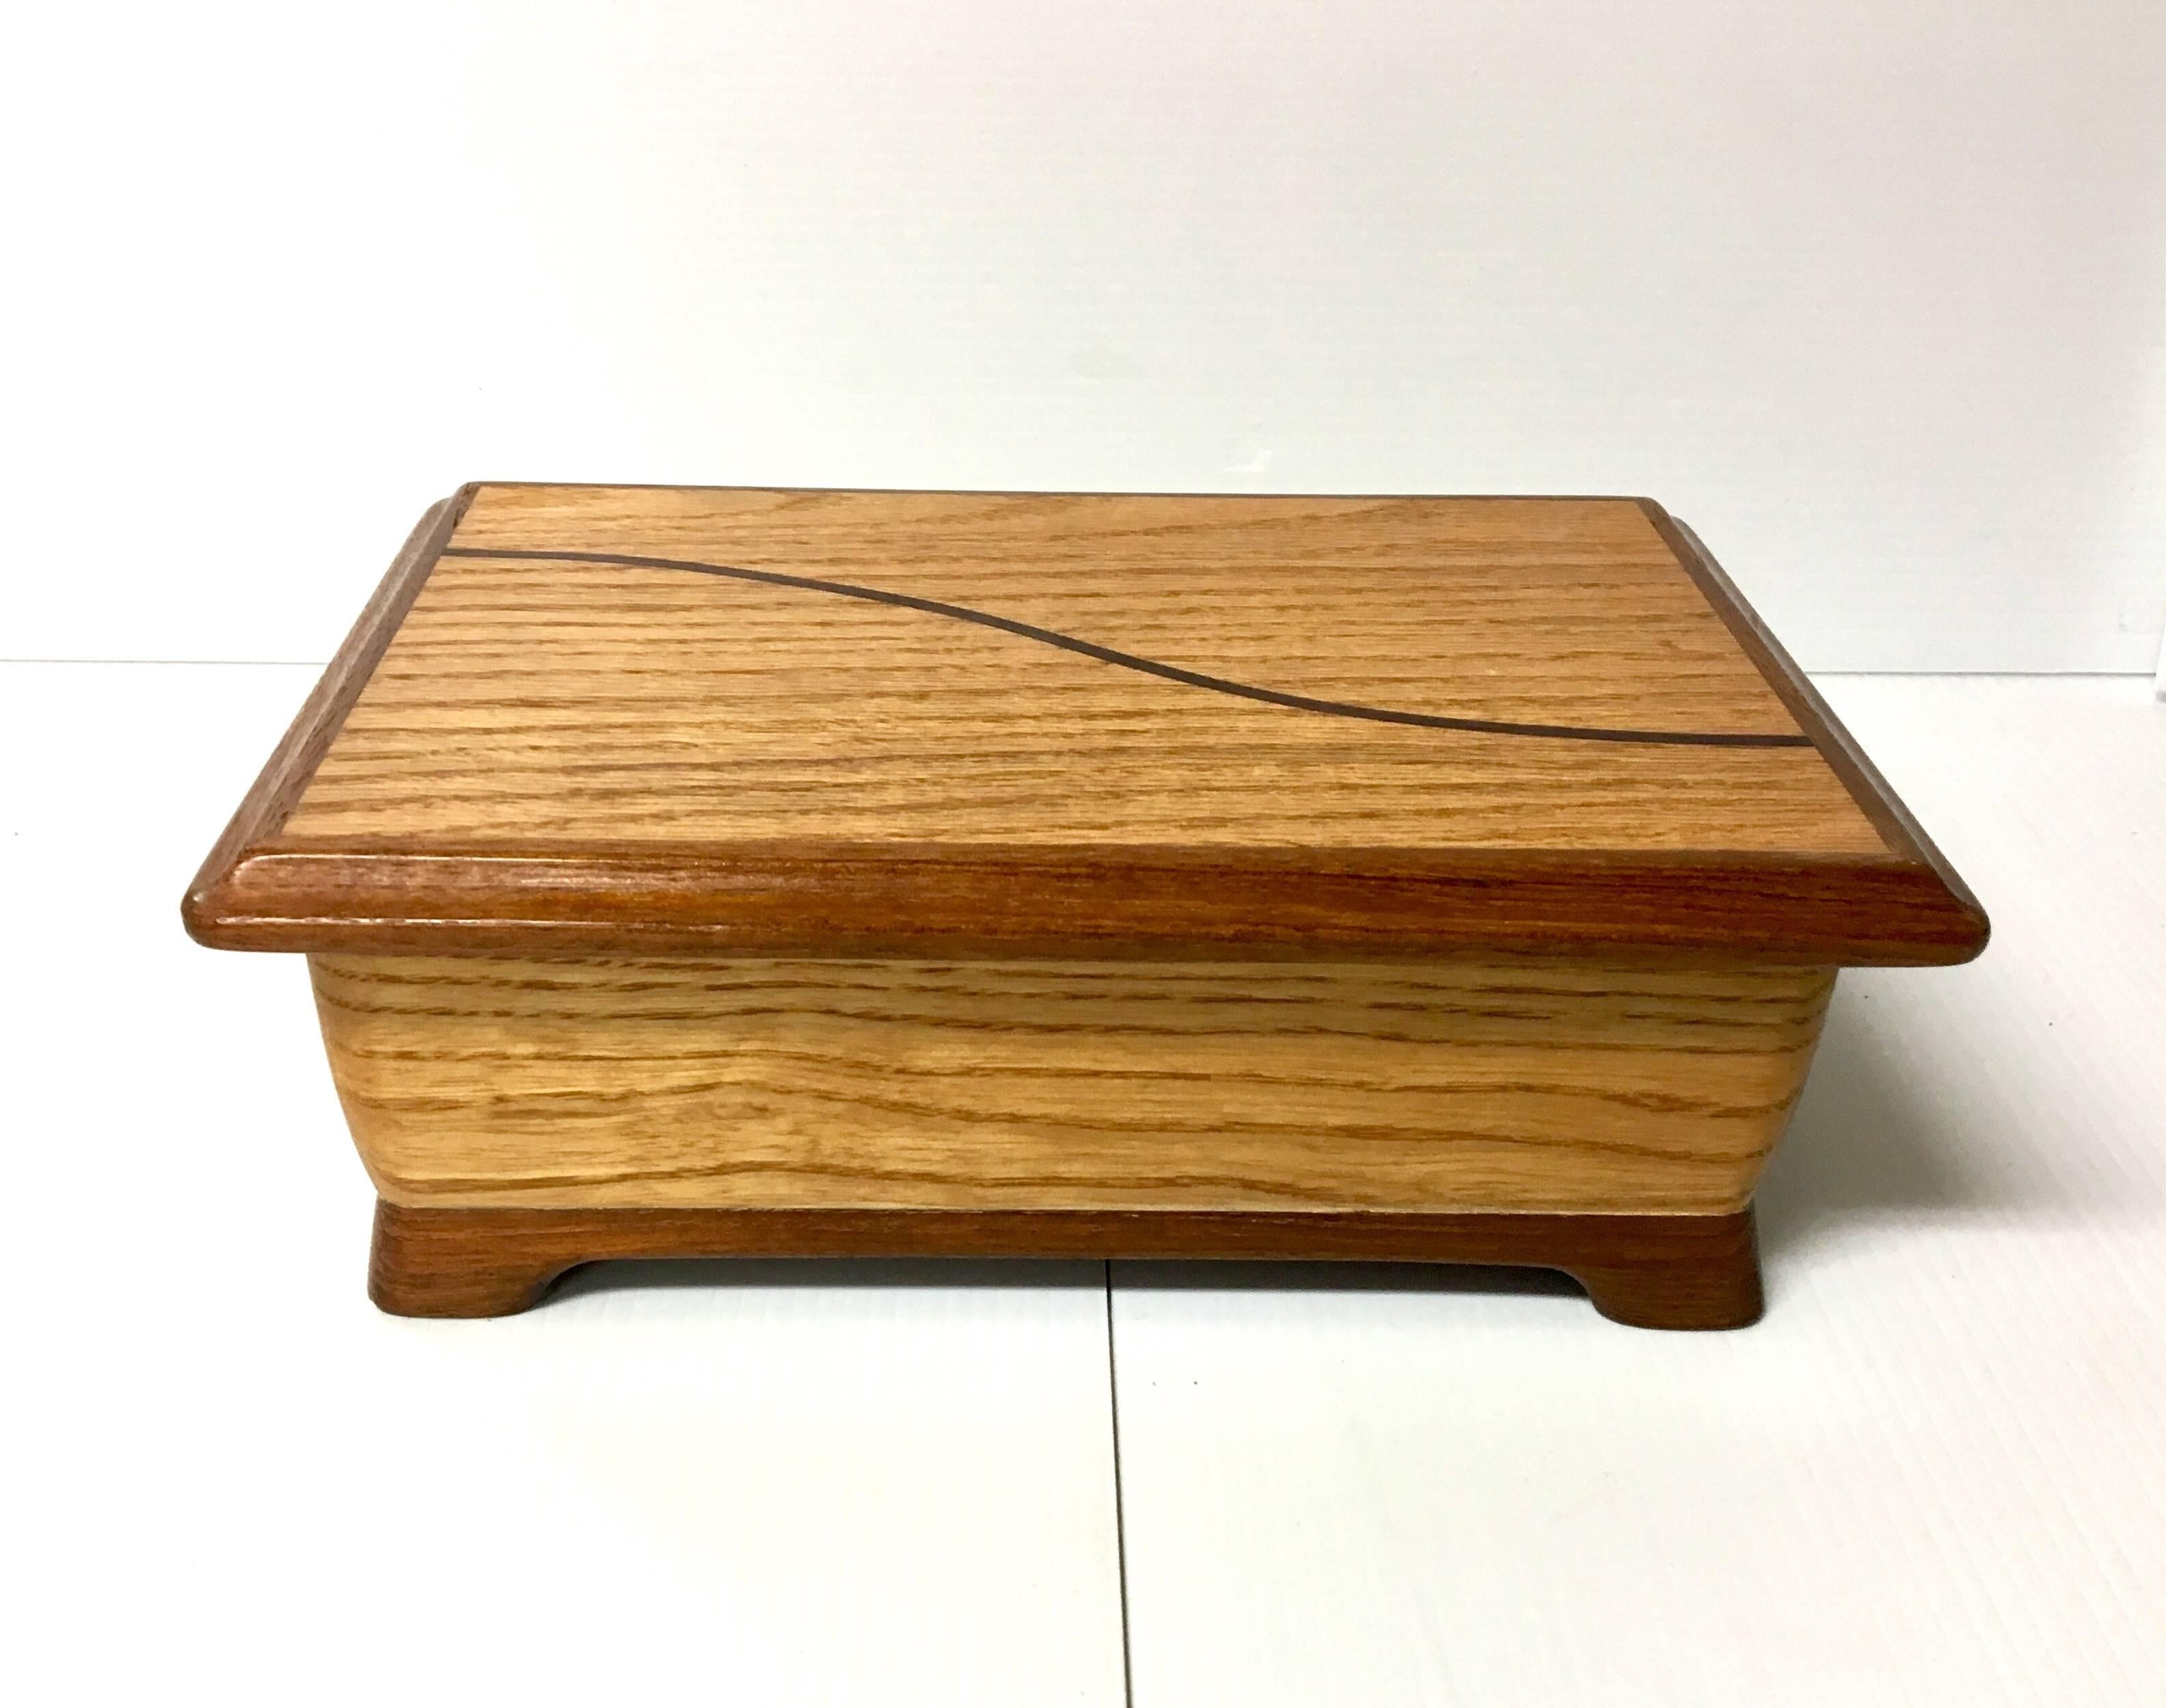 Nice detail on this solid oak with walnut edge and rosewood inlay jewelry box, circa 1970s. Well crafted, solid construction.